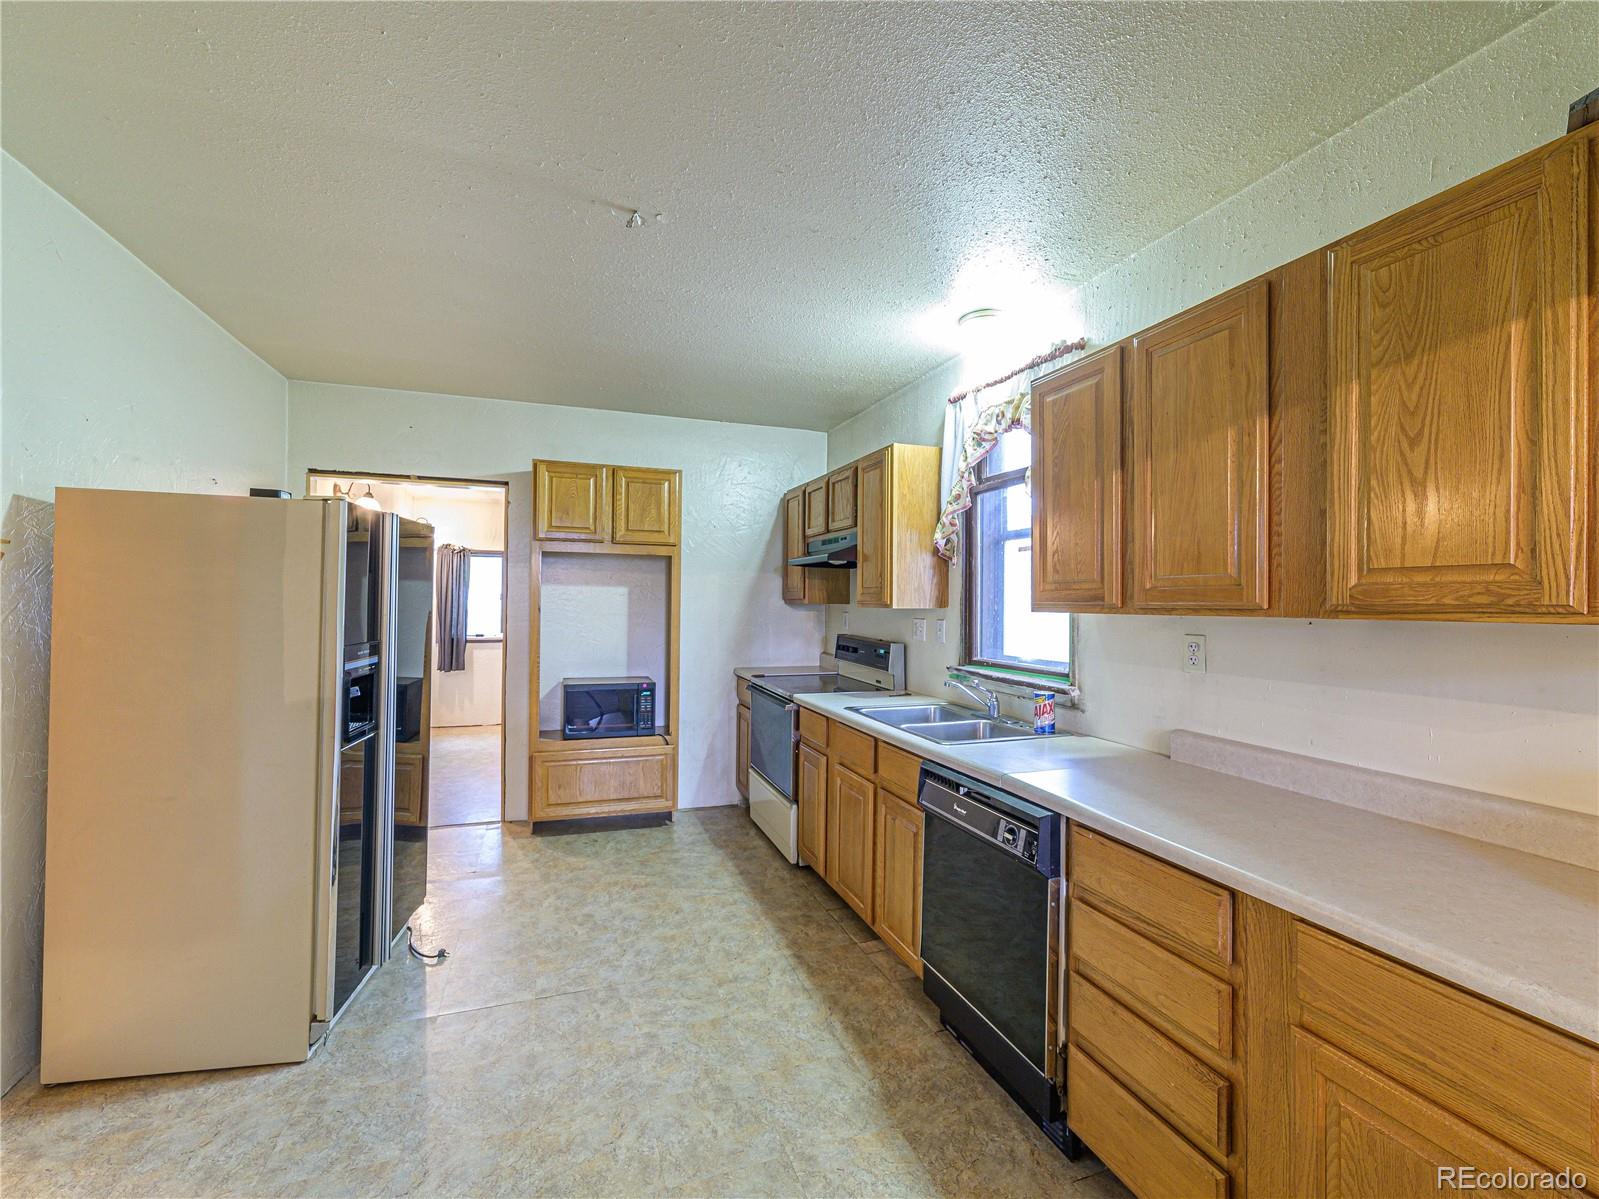 256 A, Ault, CO